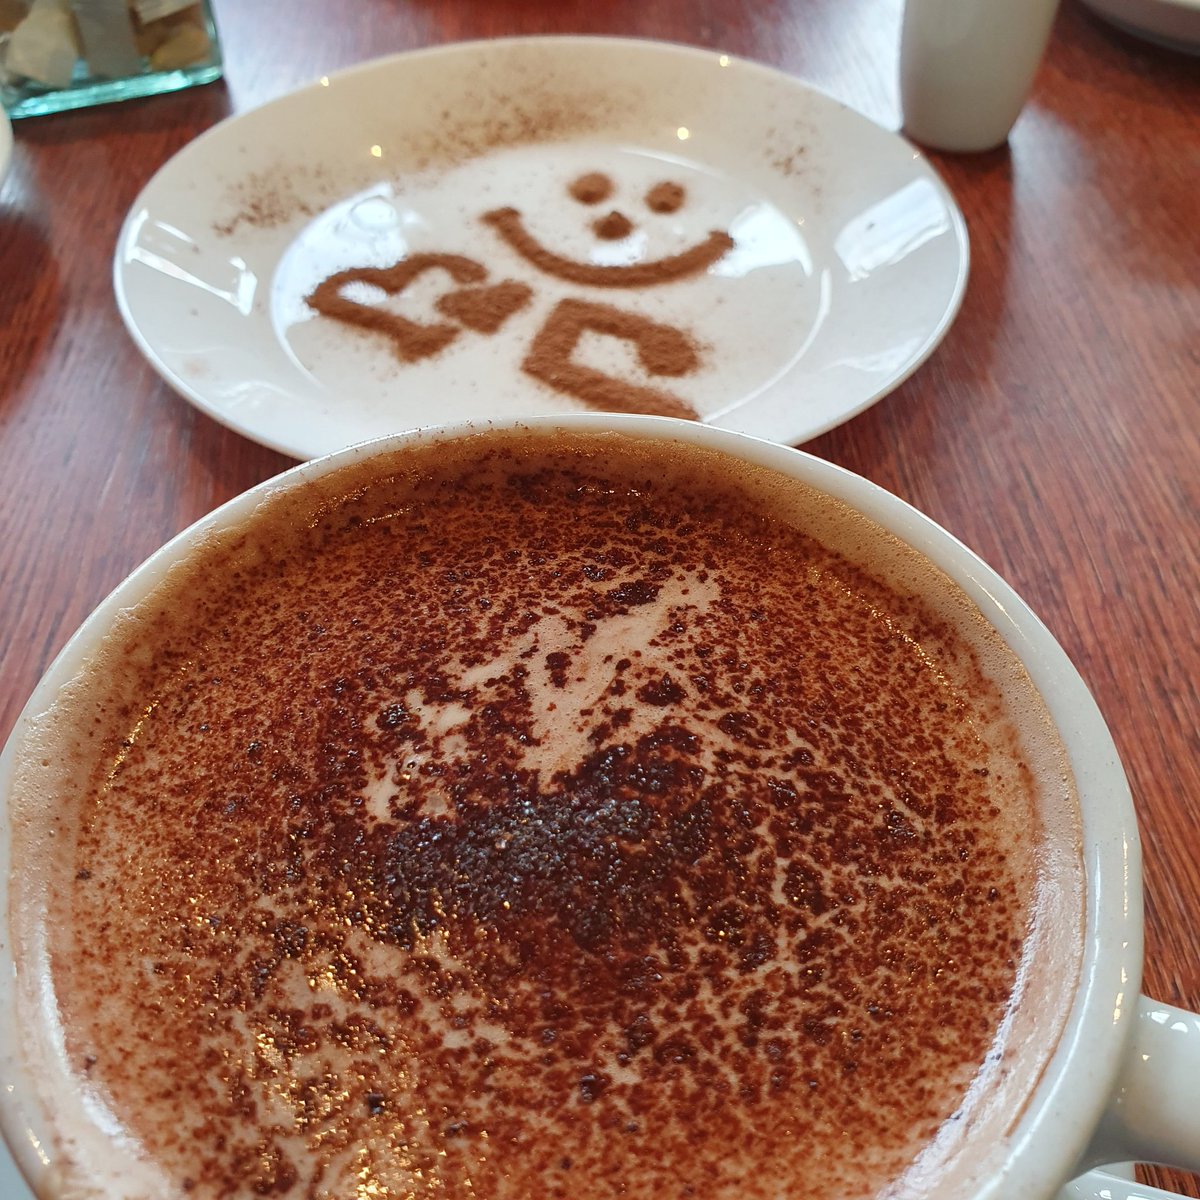 They forgot my smiley face so I got a smile on a plate! #Welovecoffee #Harefield @Hillingdon